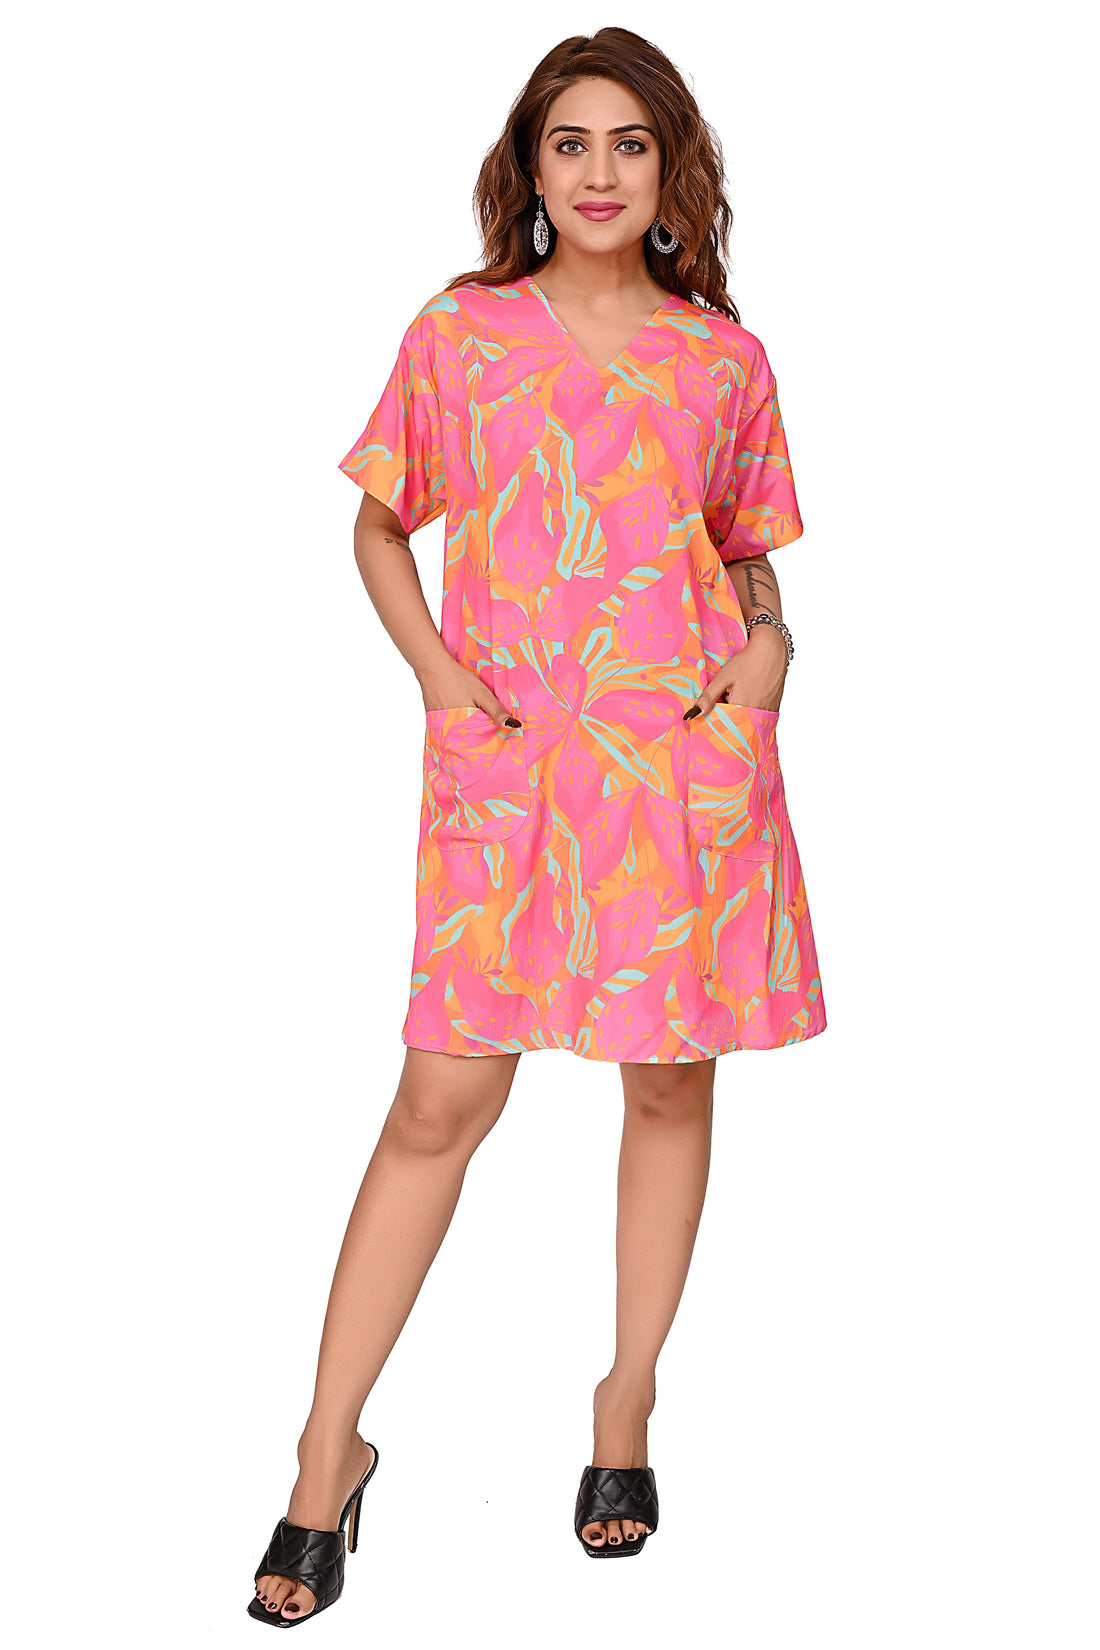 Nirmal online Premium Quality Digital Printed Tunic for Women in Pink Colour